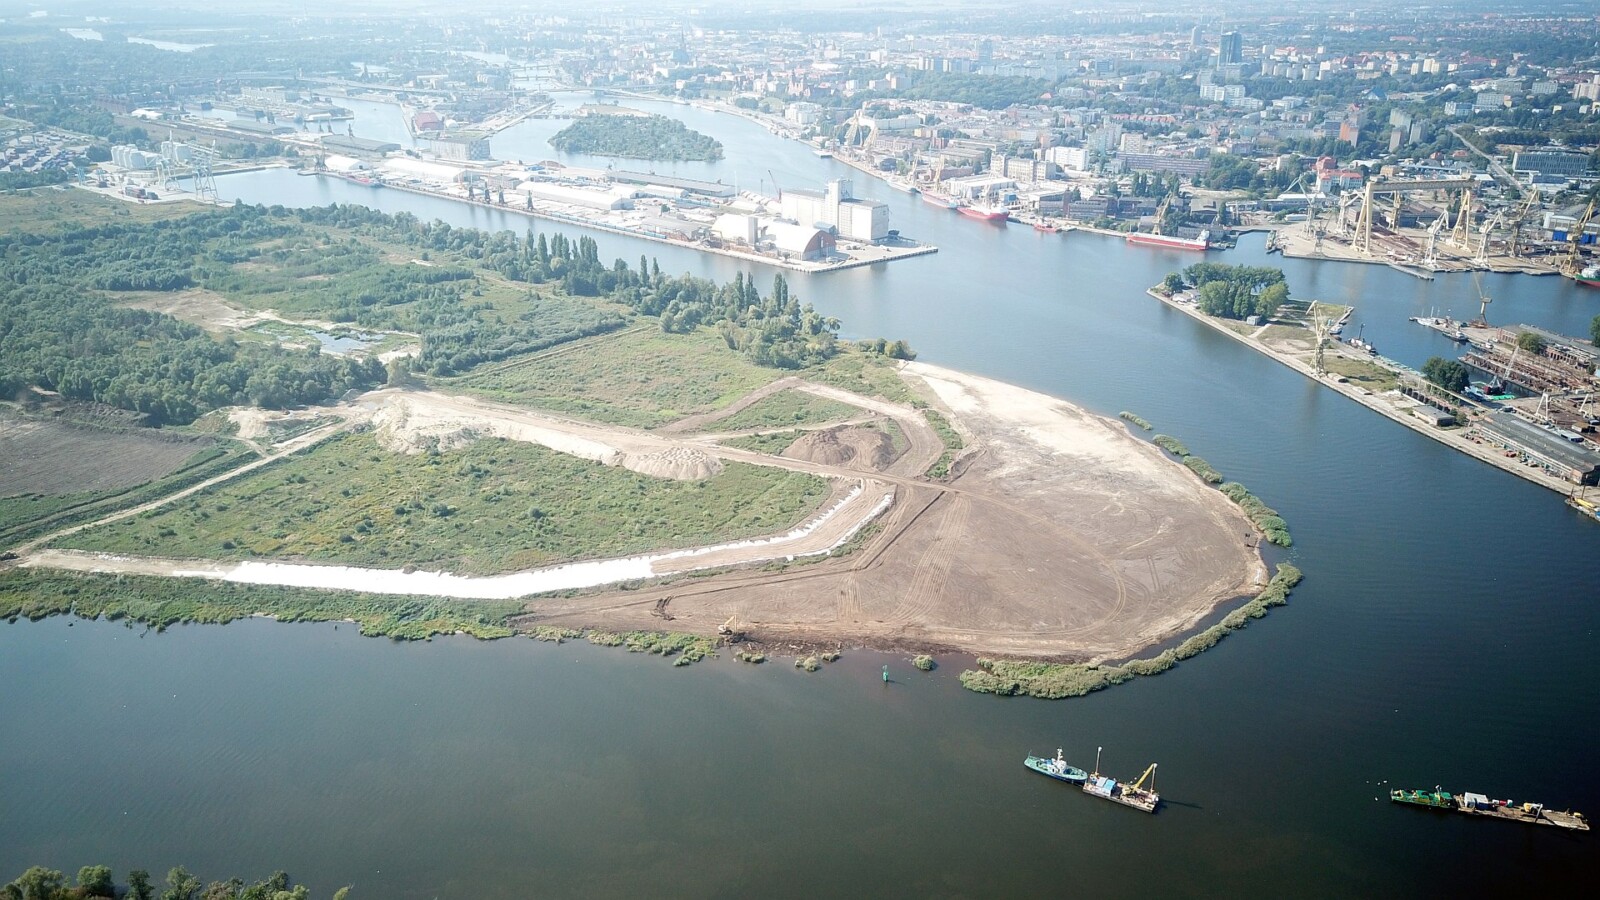 Improving access to the Port of Szczecin in the area of the Dębicki Canal